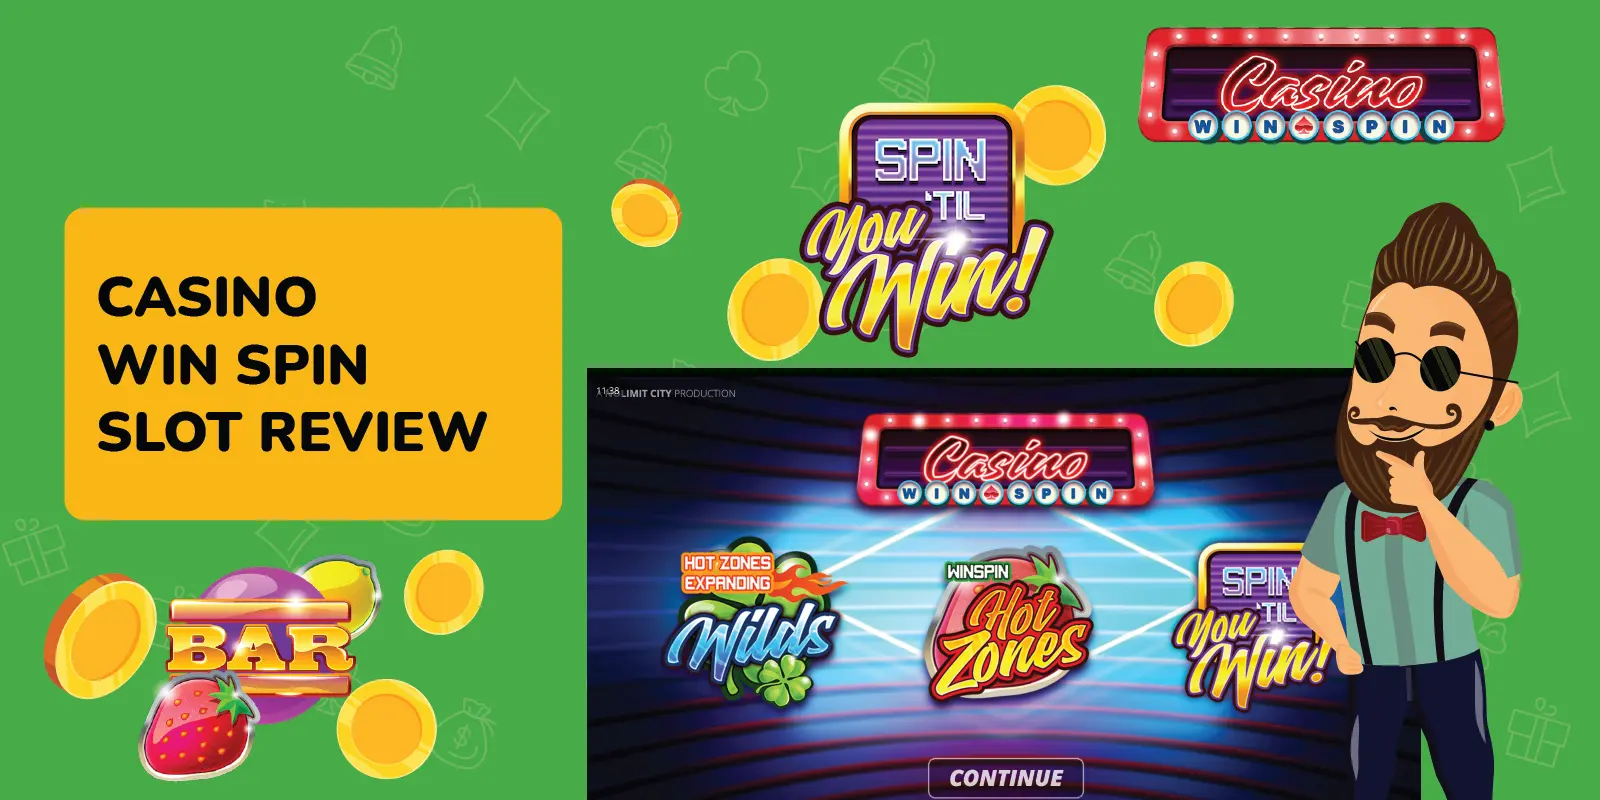 Casino Win Spin Slot Features: Wild Wilds